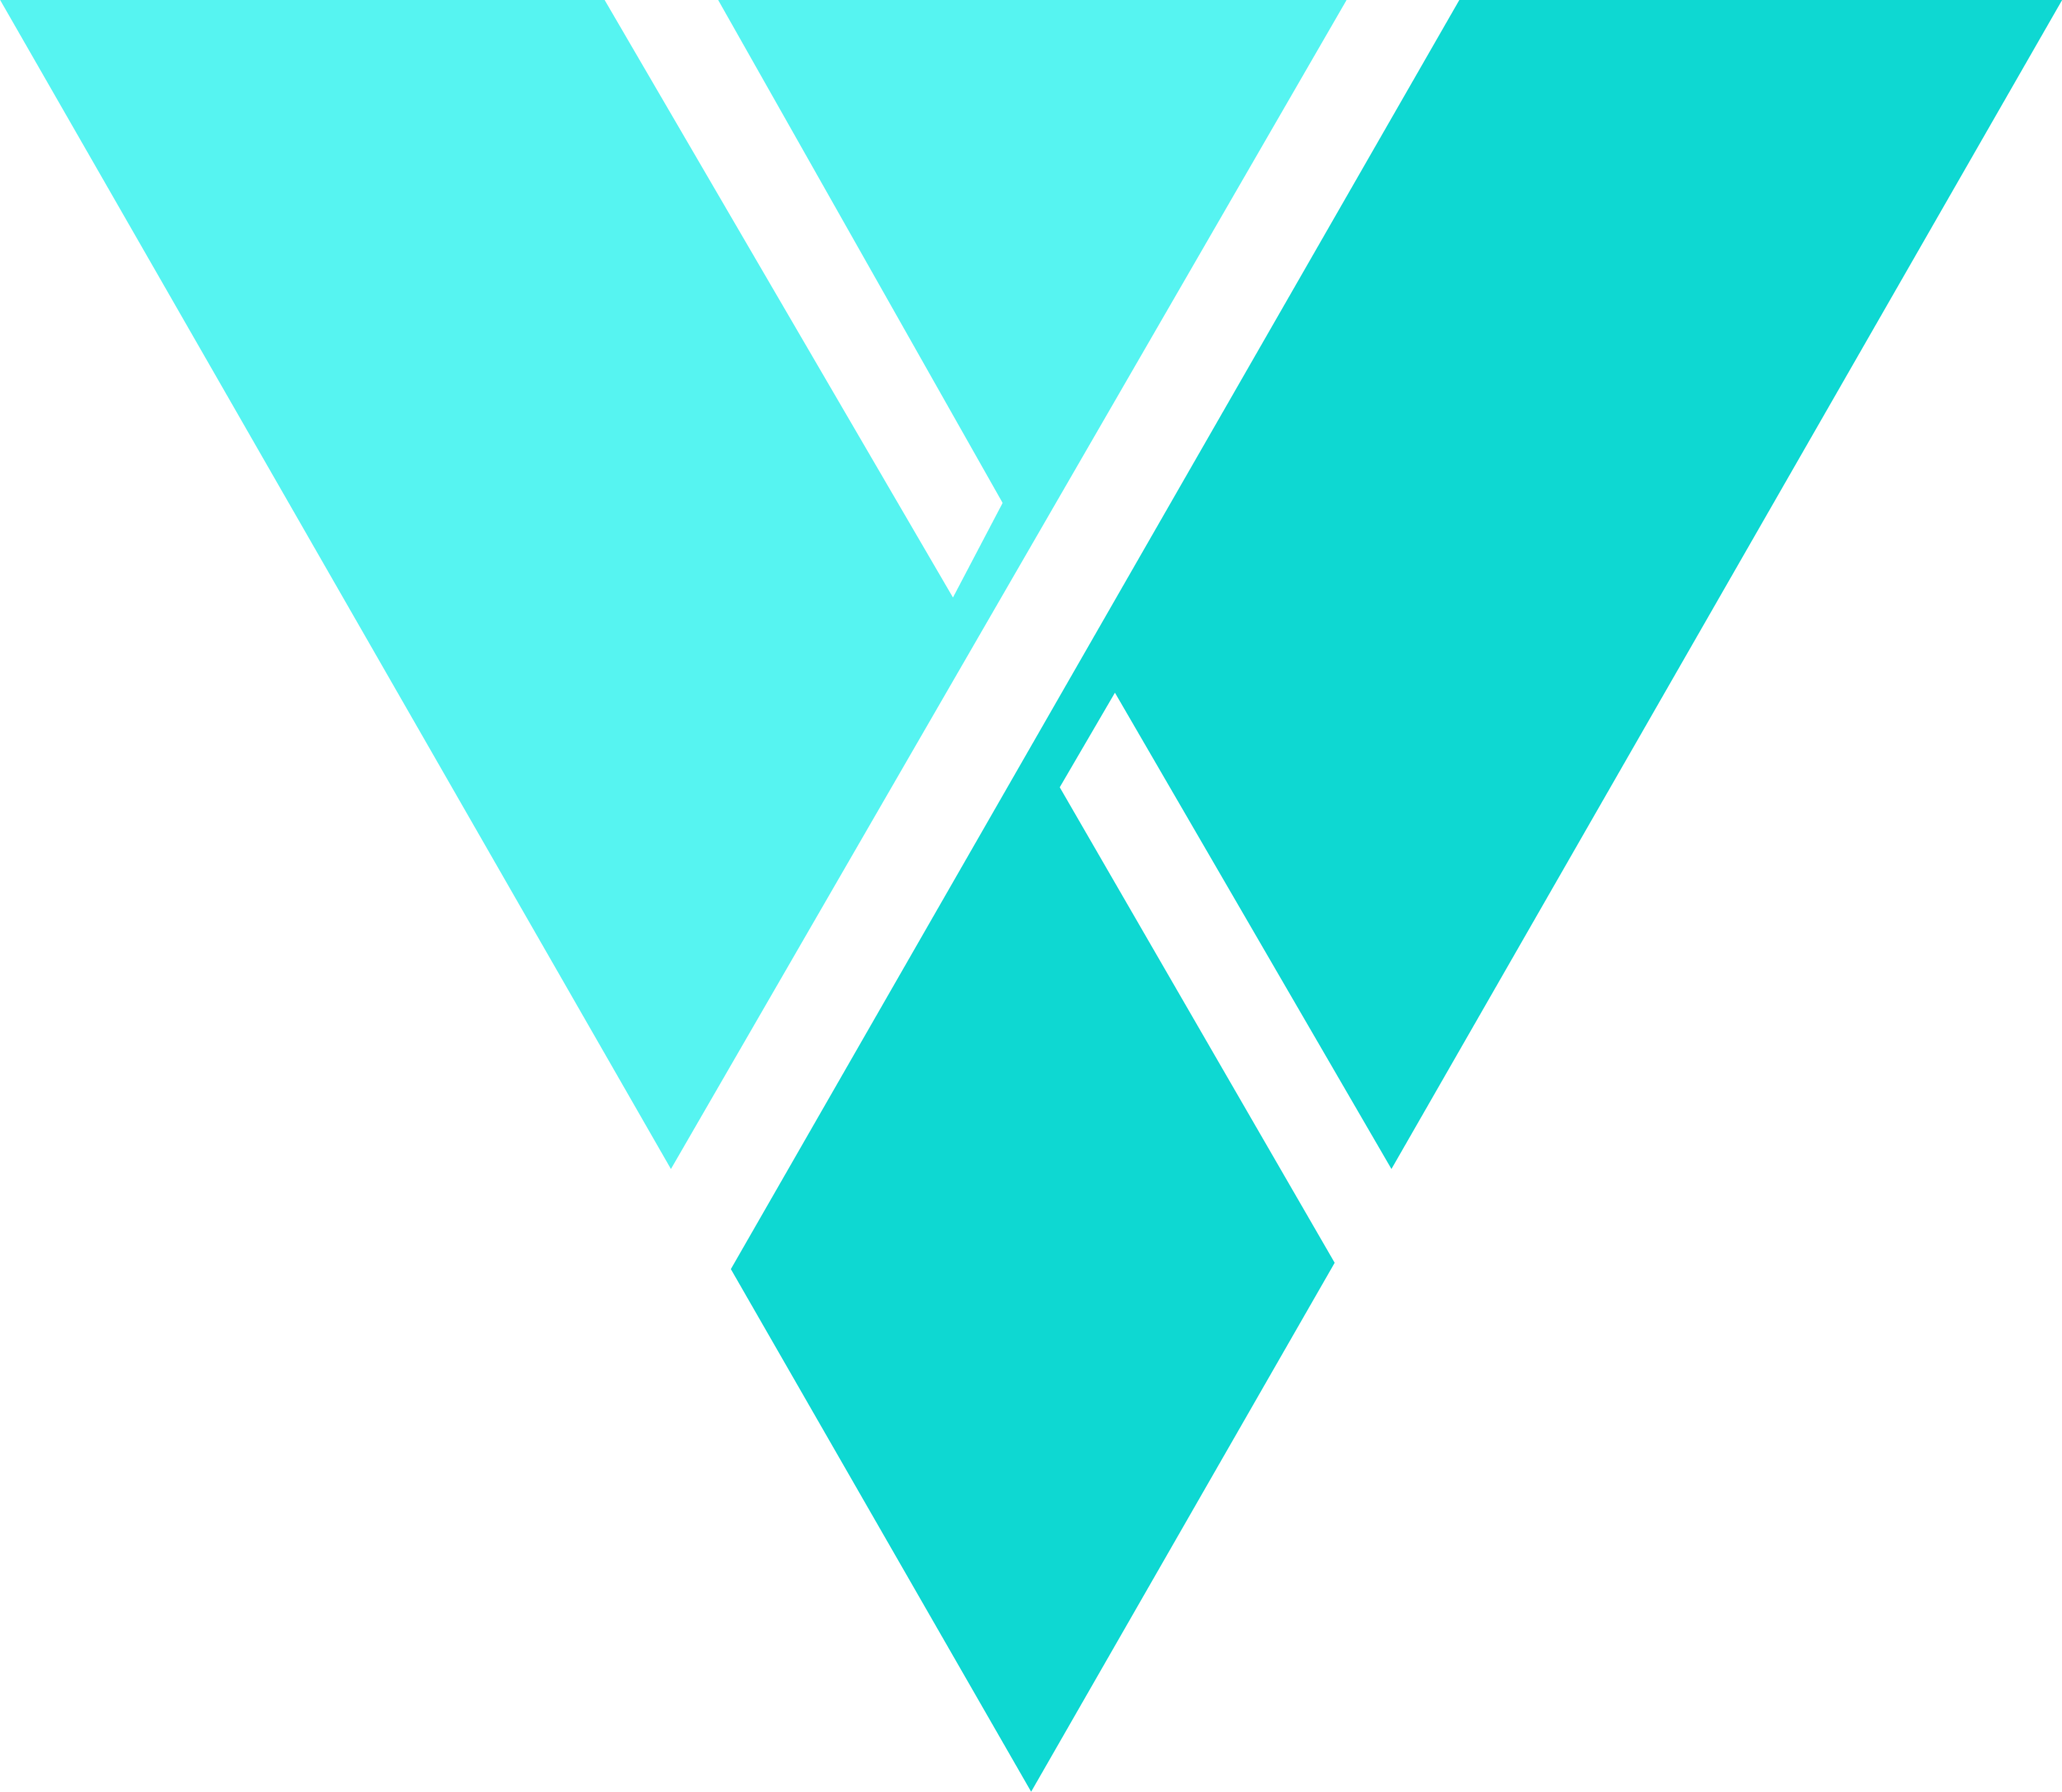 xby_logo_high-res.png